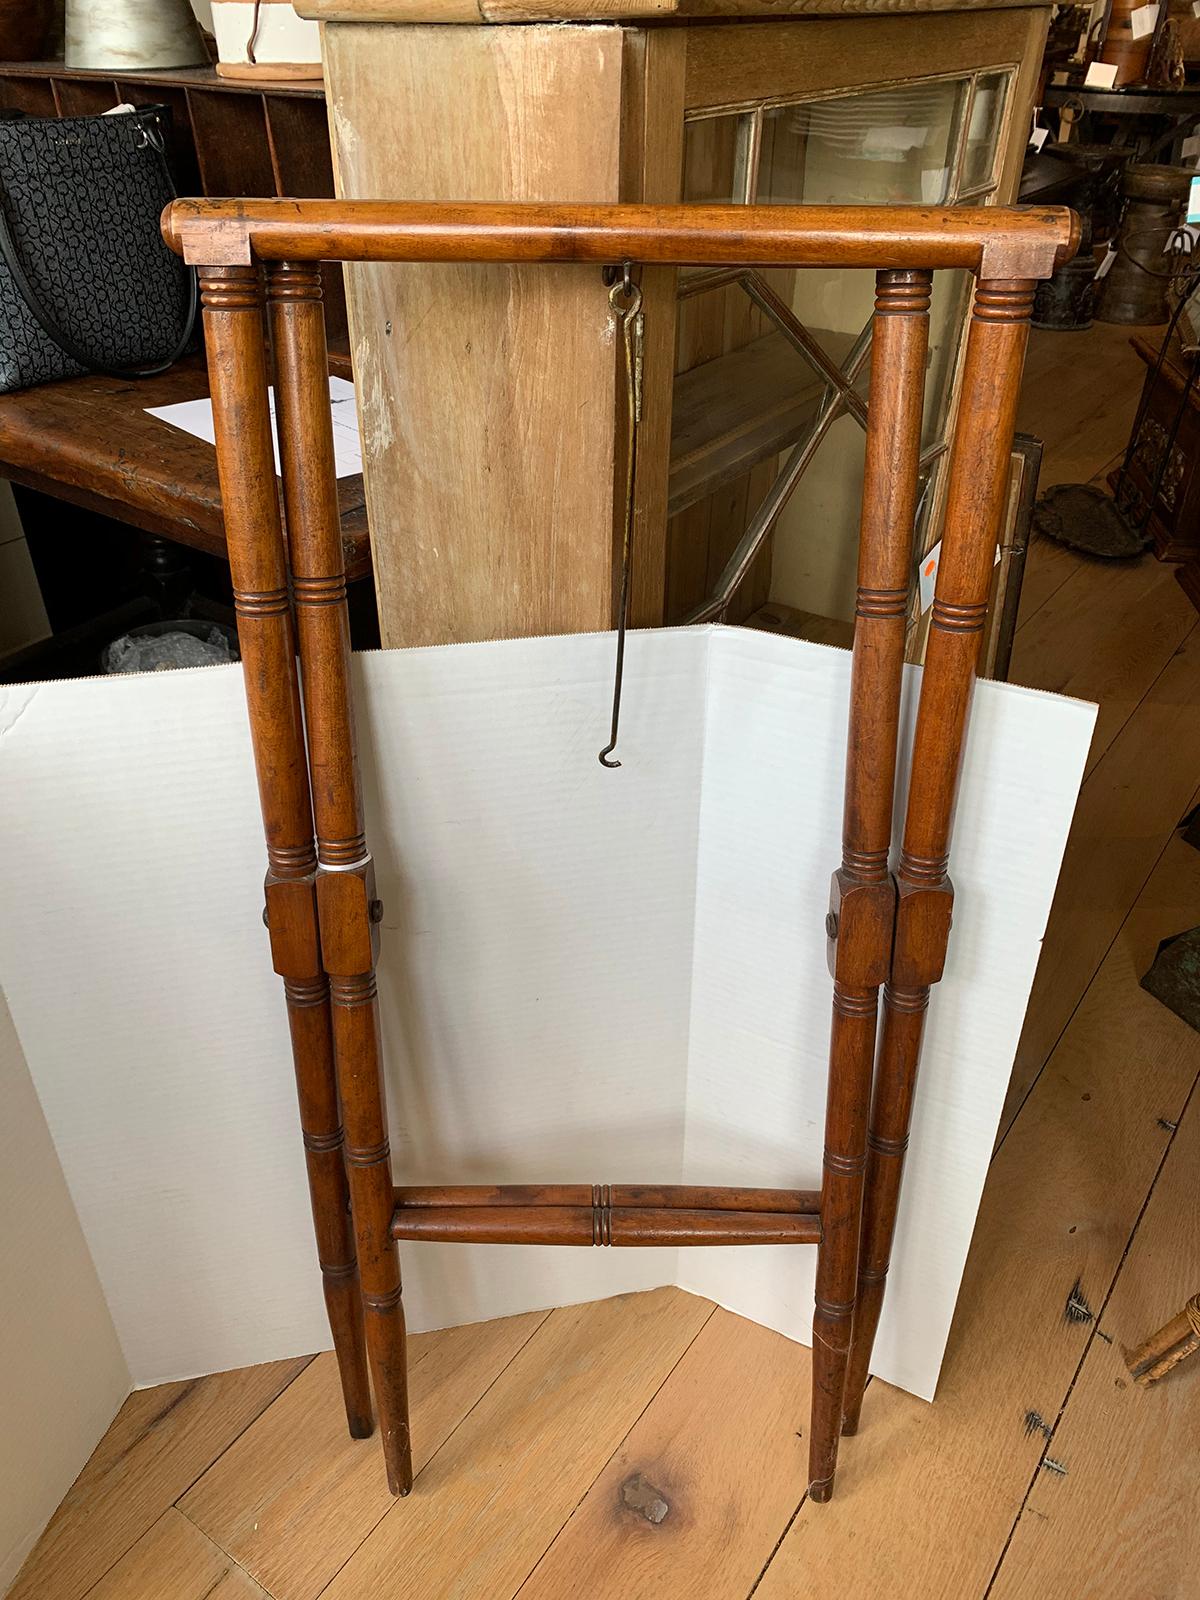 19th-20th century wooden folding tray stand
Measures: Top: 14